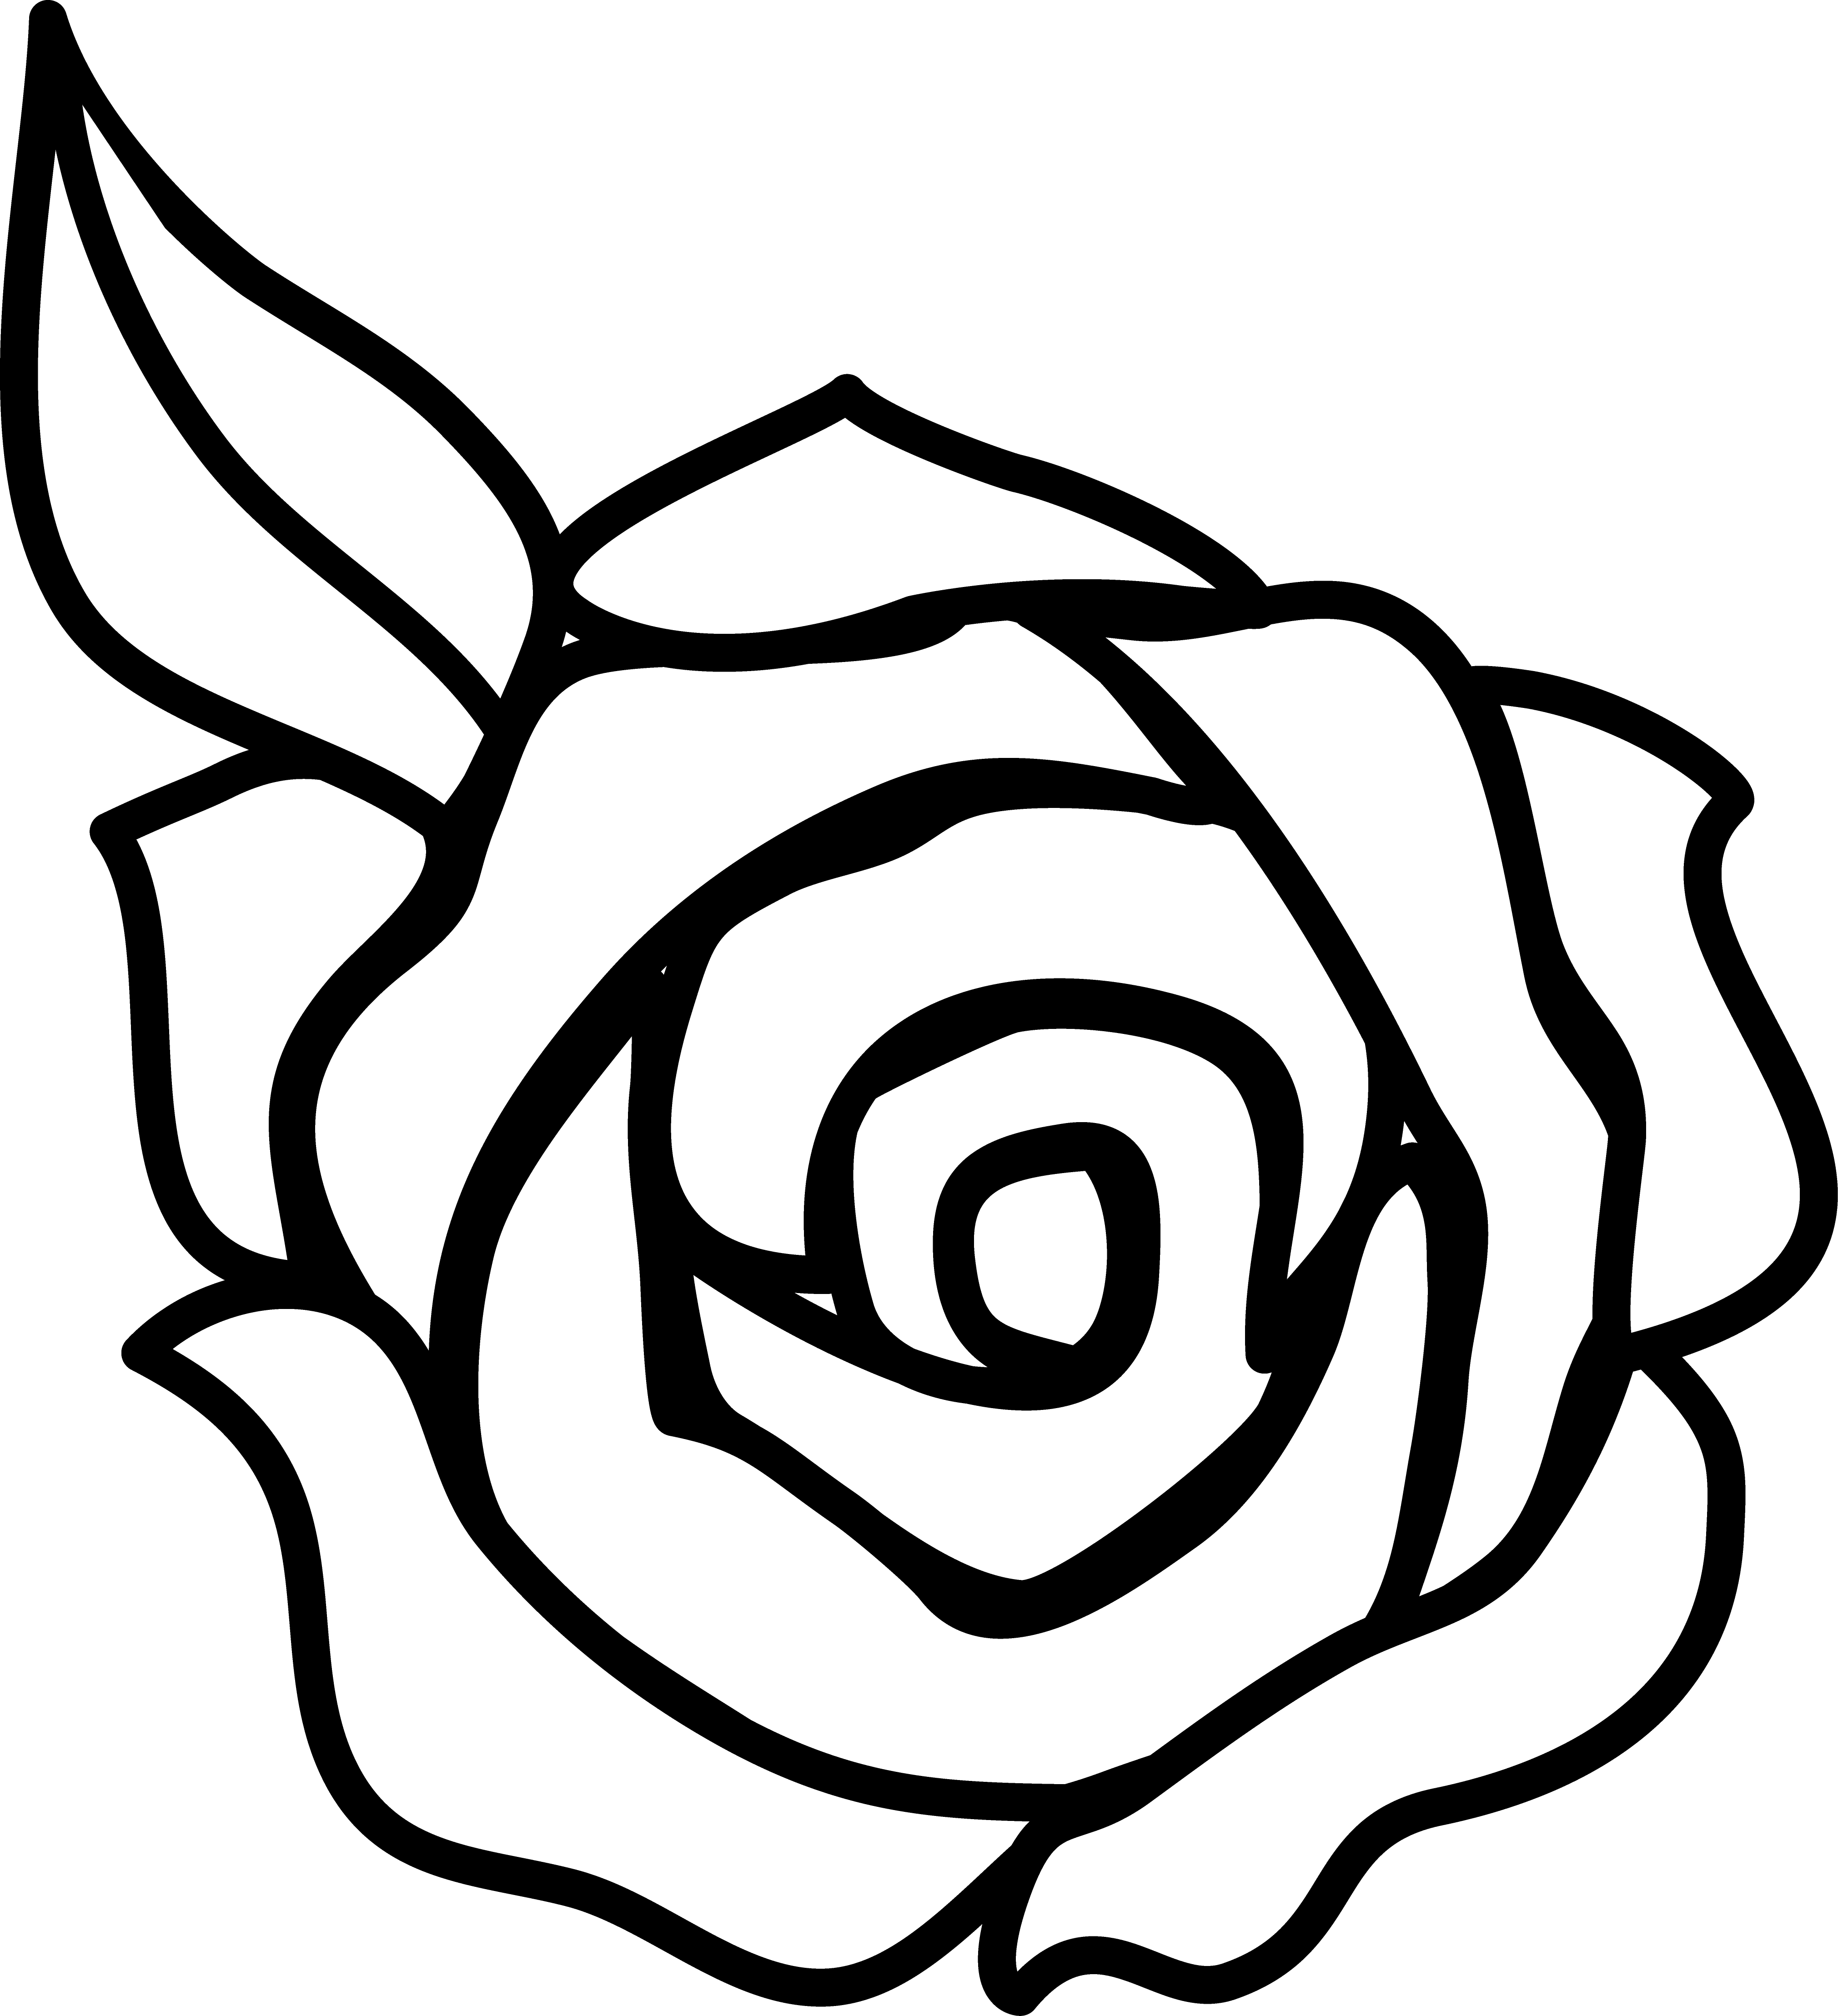 Panda clipart easy. Black and white rose